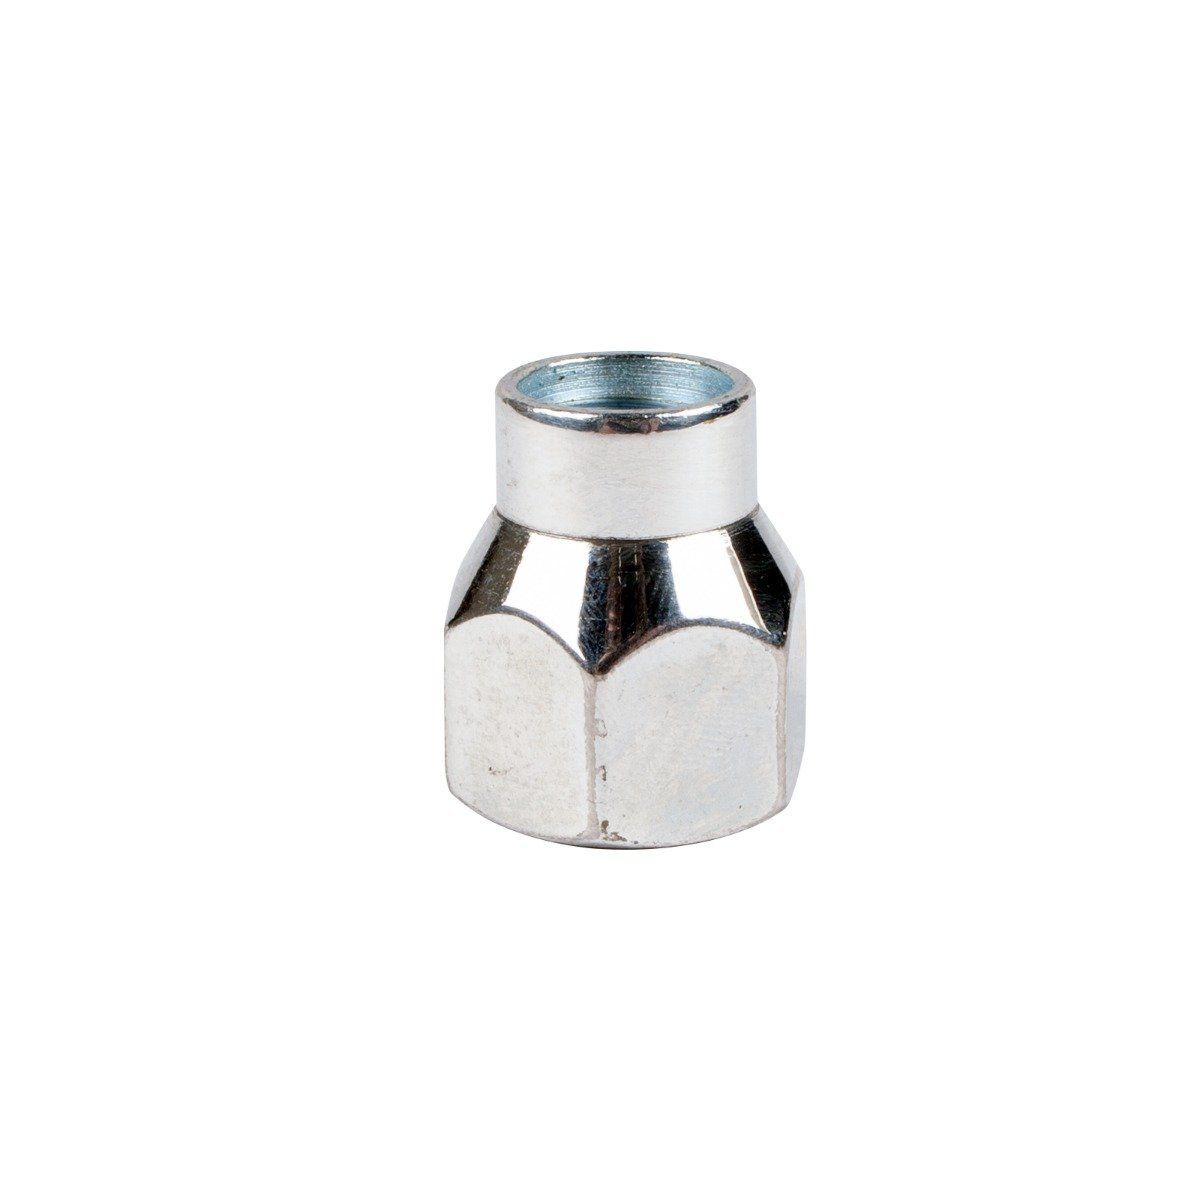 All-Pro Off-Road Extended Thread Lug Nuts - M12x1.5MM